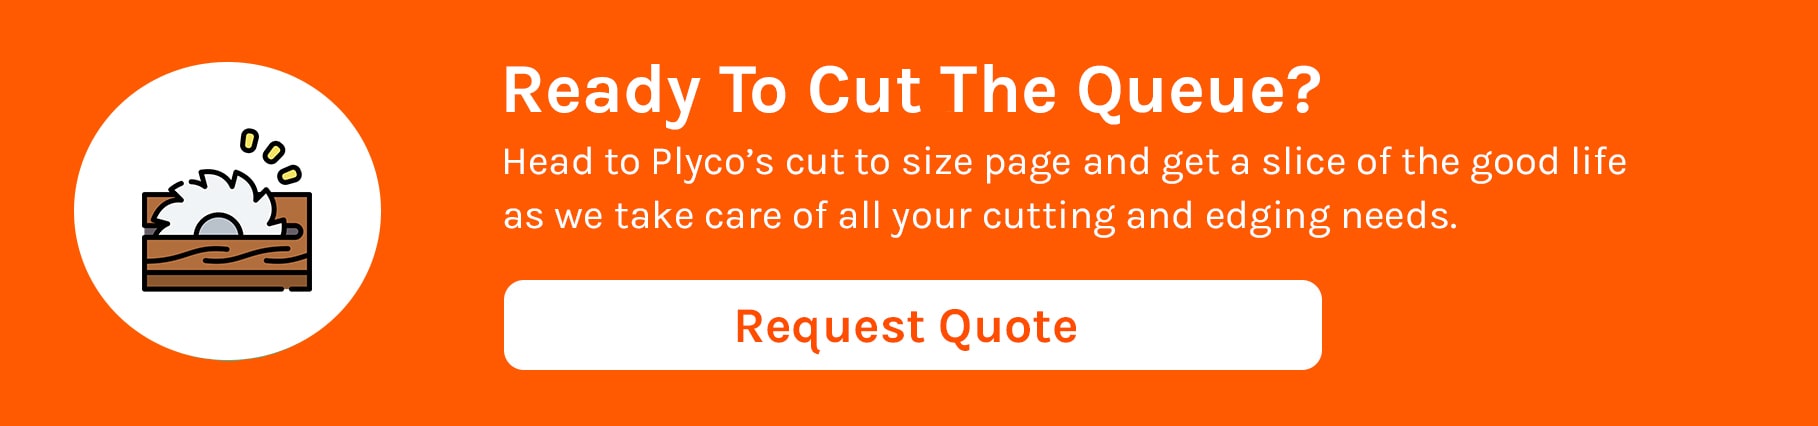 Call to action to request a quote from Plyco's cut to size service